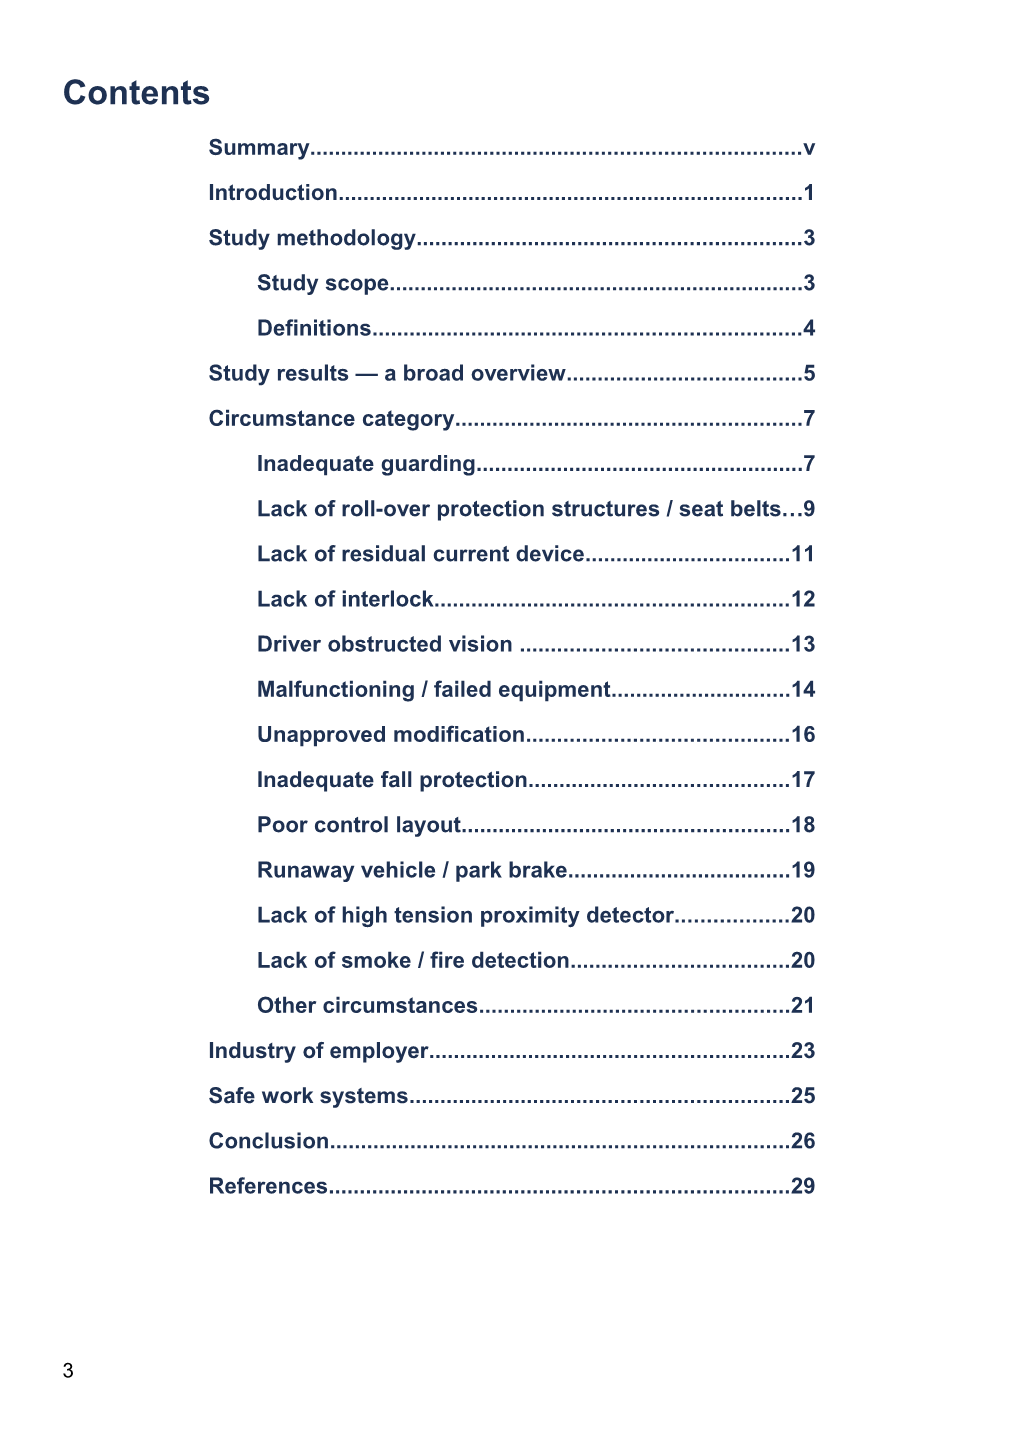 Work-Related Fatalities Associated with Unsafe Design of Machinery, Plant and Powered Tools